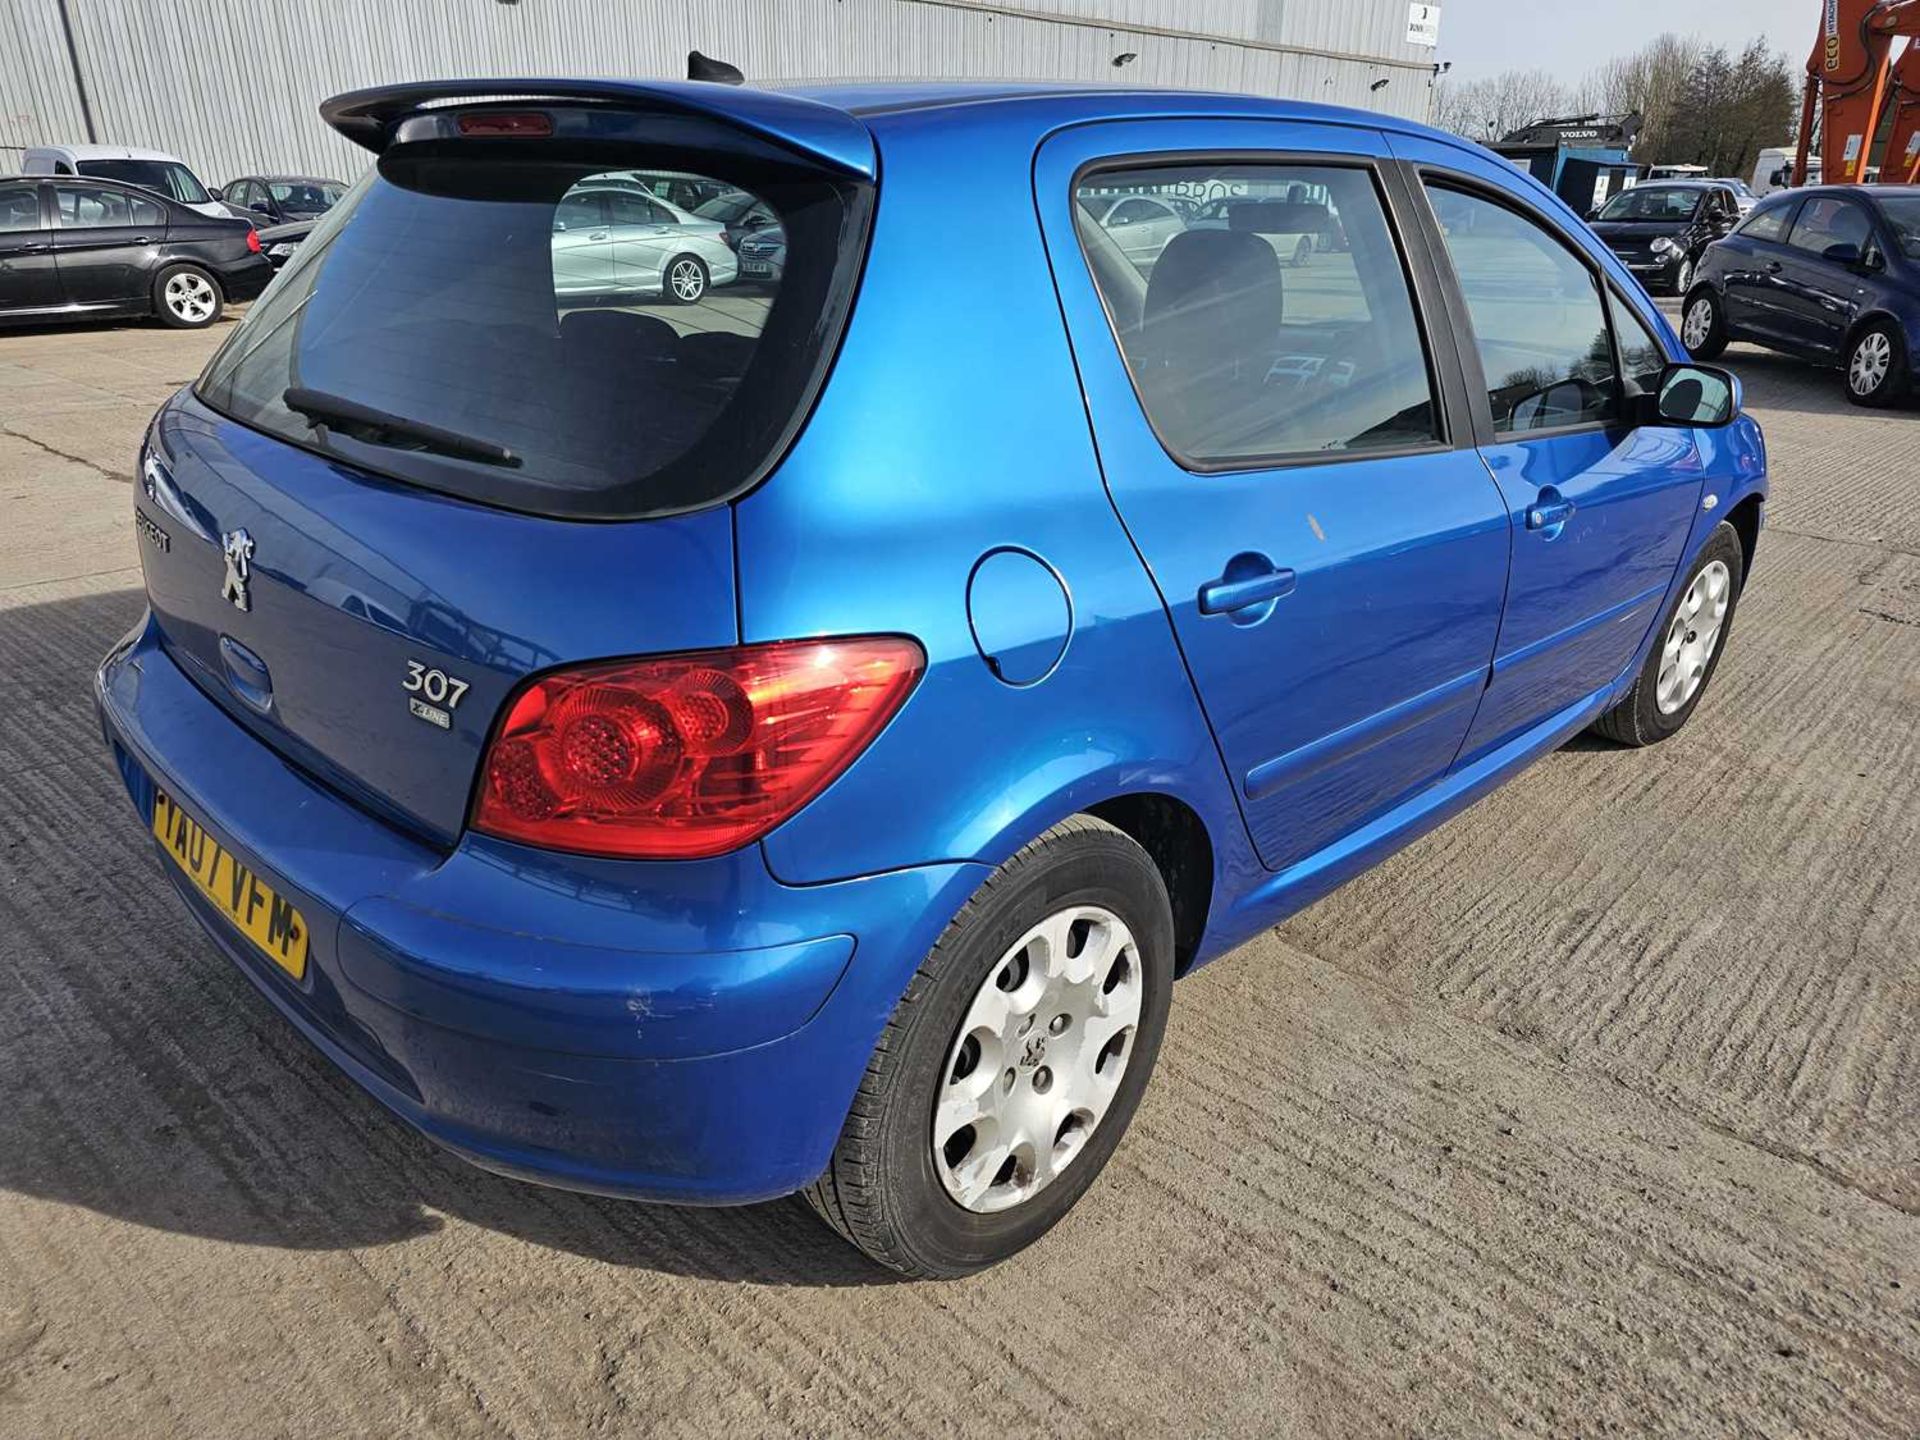 2007 Peugeot 307 X-line, 5 Speed, A/C (Reg. Docs. & Service History Available, Tested 07/24) - Image 7 of 56